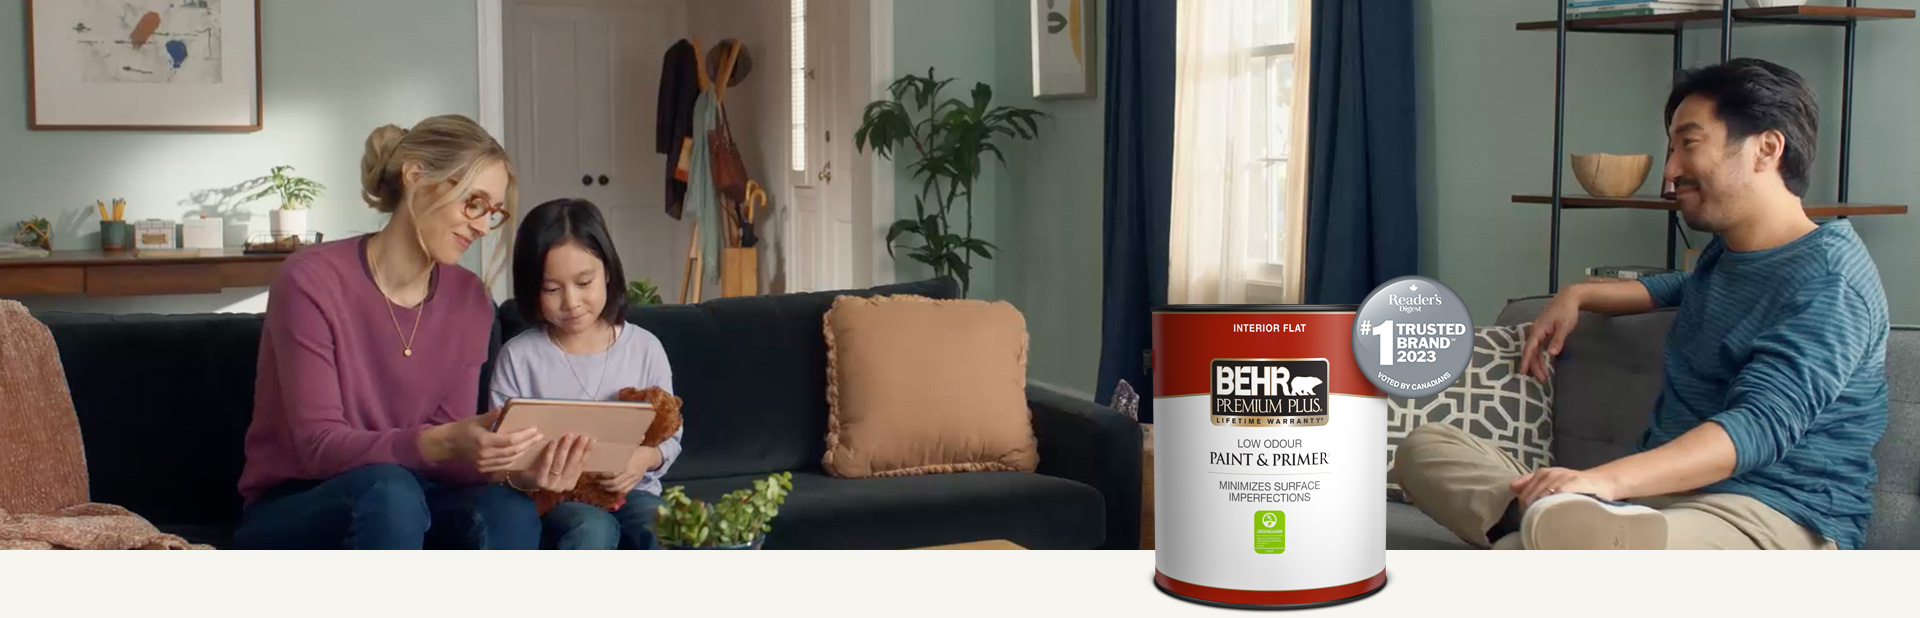 Family sitting in a painted living room with a Behr Premium Plus Interior Flat Paint